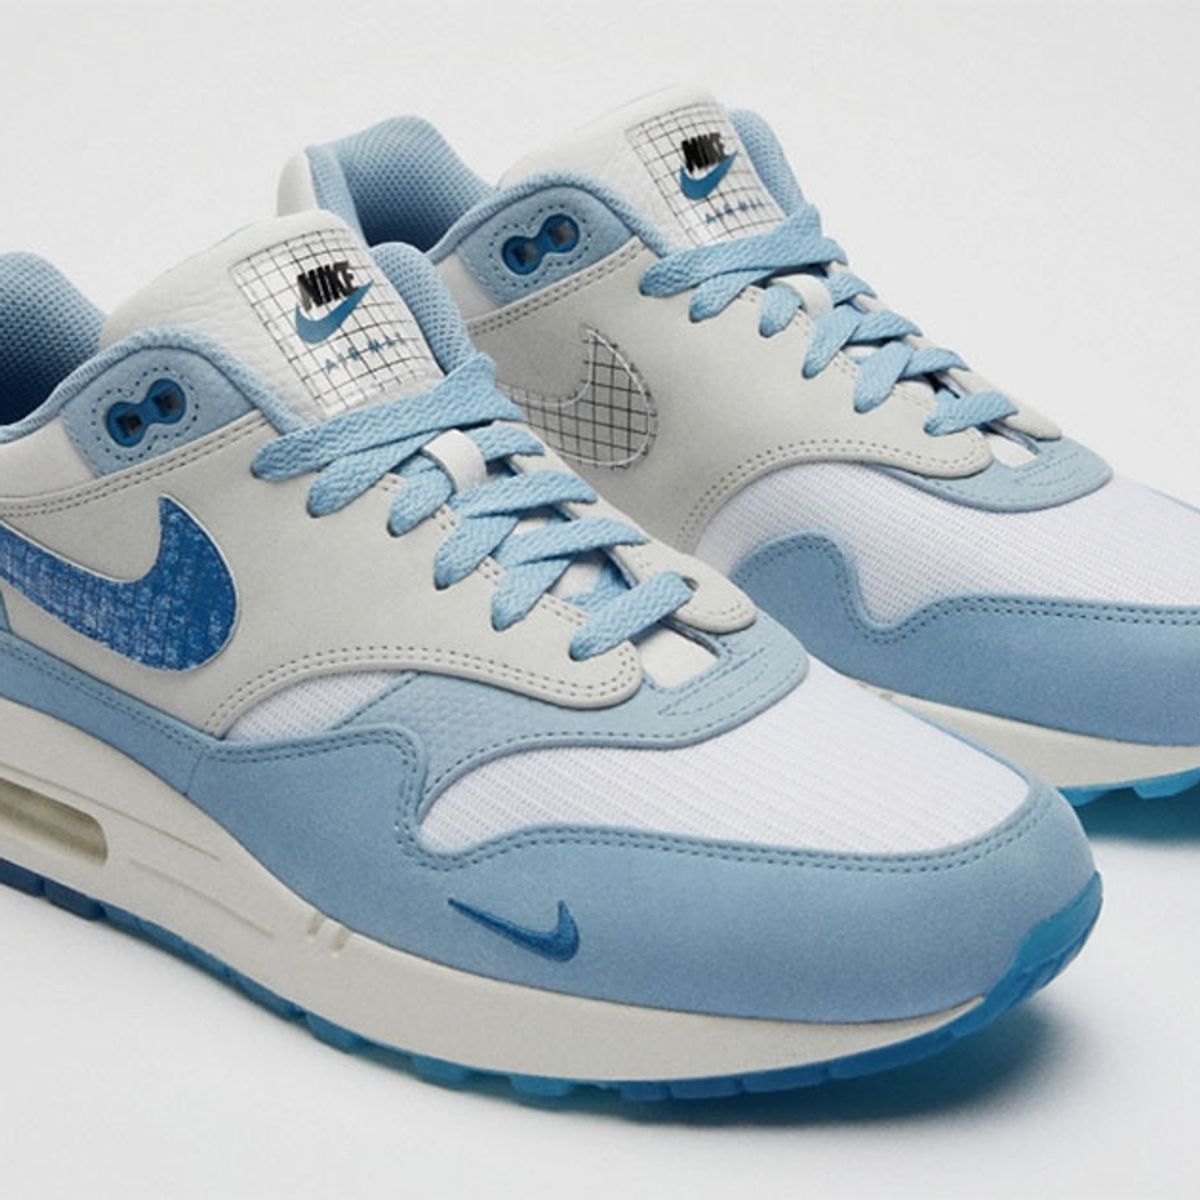 Filosofisch chrysant Chinese kool The Nike Air Max 1 'Blueprint' is a North America Exclusive for Air Max Day  - Sneaker Freaker